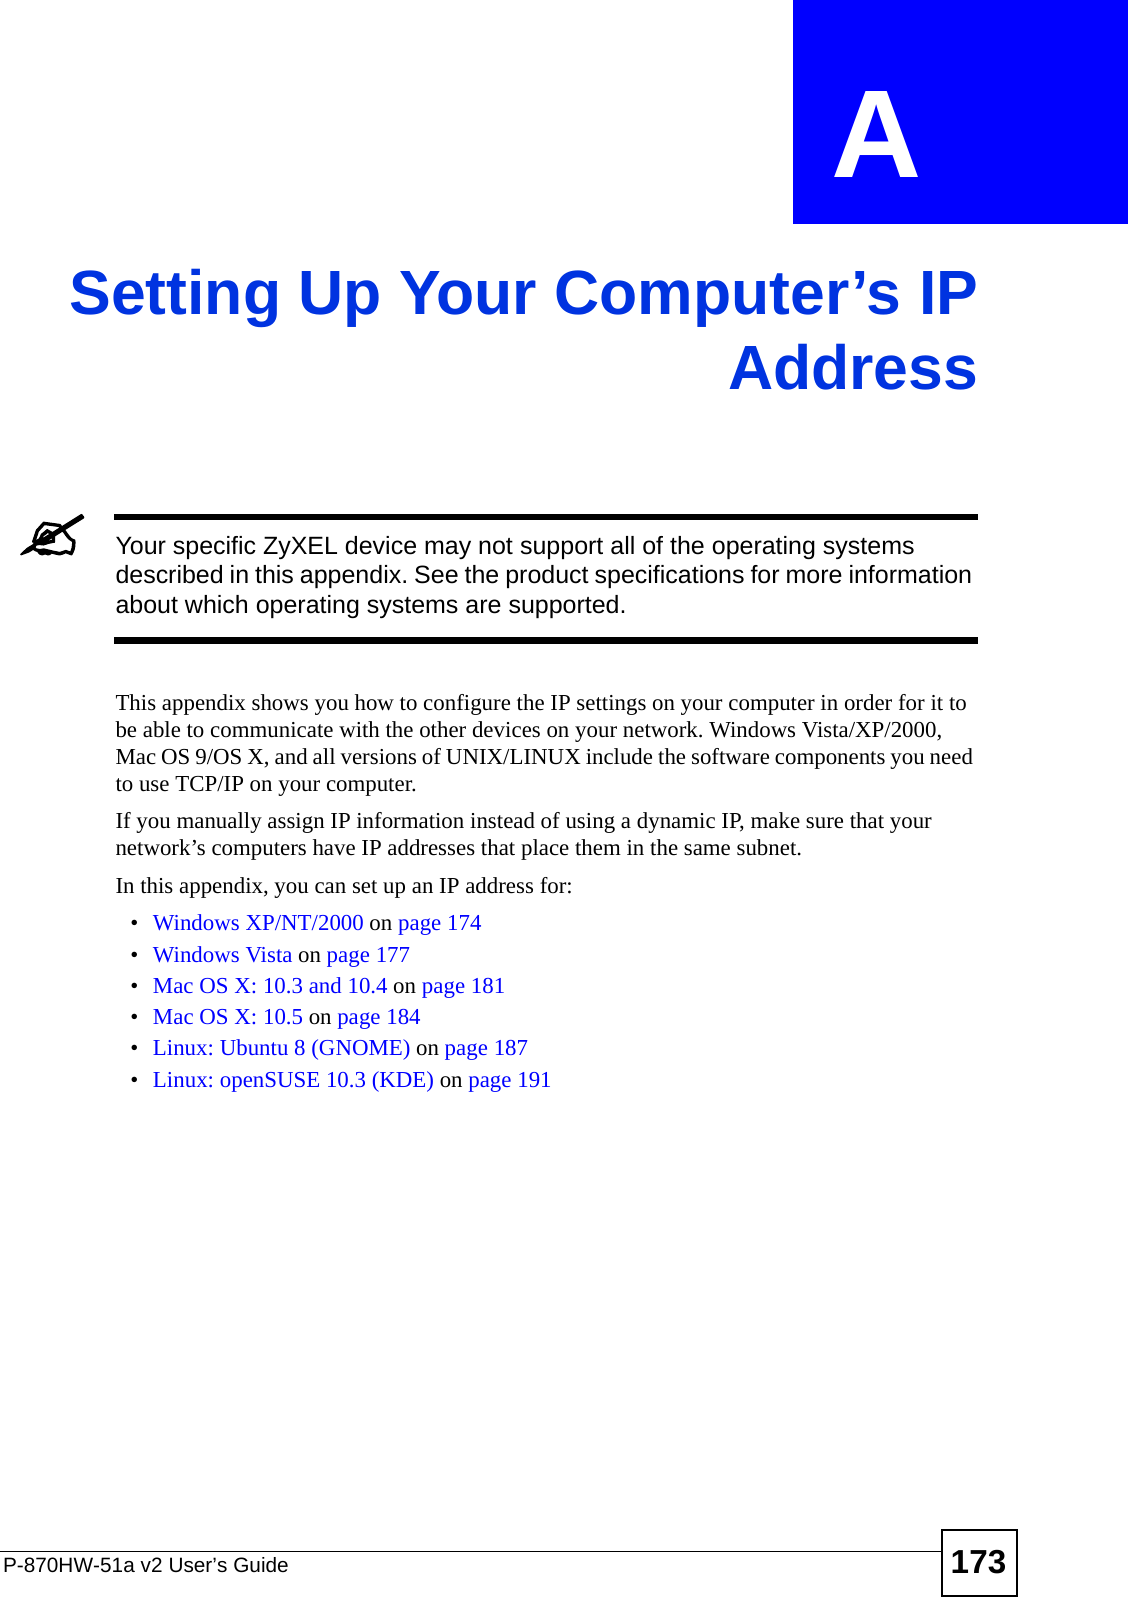 P-870HW-51a v2 User’s Guide 173APPENDIX  A Setting Up Your Computer’s IPAddress&quot;Your specific ZyXEL device may not support all of the operating systems described in this appendix. See the product specifications for more information about which operating systems are supported.This appendix shows you how to configure the IP settings on your computer in order for it to be able to communicate with the other devices on your network. Windows Vista/XP/2000, Mac OS 9/OS X, and all versions of UNIX/LINUX include the software components you need to use TCP/IP on your computer. If you manually assign IP information instead of using a dynamic IP, make sure that your network’s computers have IP addresses that place them in the same subnet.In this appendix, you can set up an IP address for:•Windows XP/NT/2000 on page 174•Windows Vista on page 177•Mac OS X: 10.3 and 10.4 on page 181•Mac OS X: 10.5 on page 184•Linux: Ubuntu 8 (GNOME) on page 187•Linux: openSUSE 10.3 (KDE) on page 191